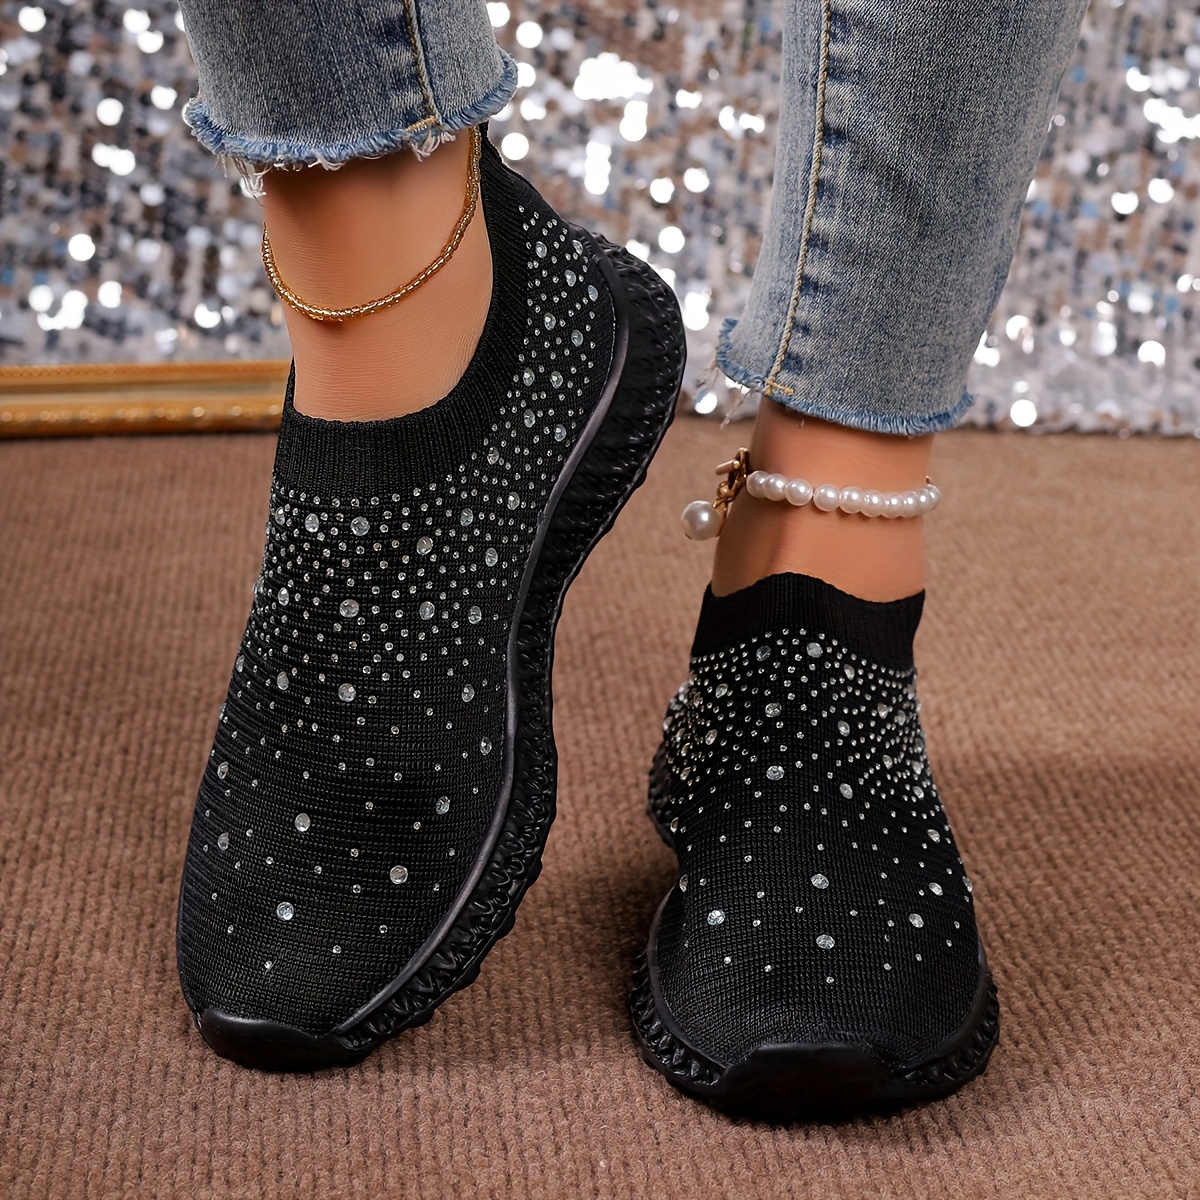 

Women's Walking Shoes, Slip-on Sneakers, Casual Comfort, Sparkling Rhinestone Embellishments, Lightweight And Breathable, Sporty Camp Shoes